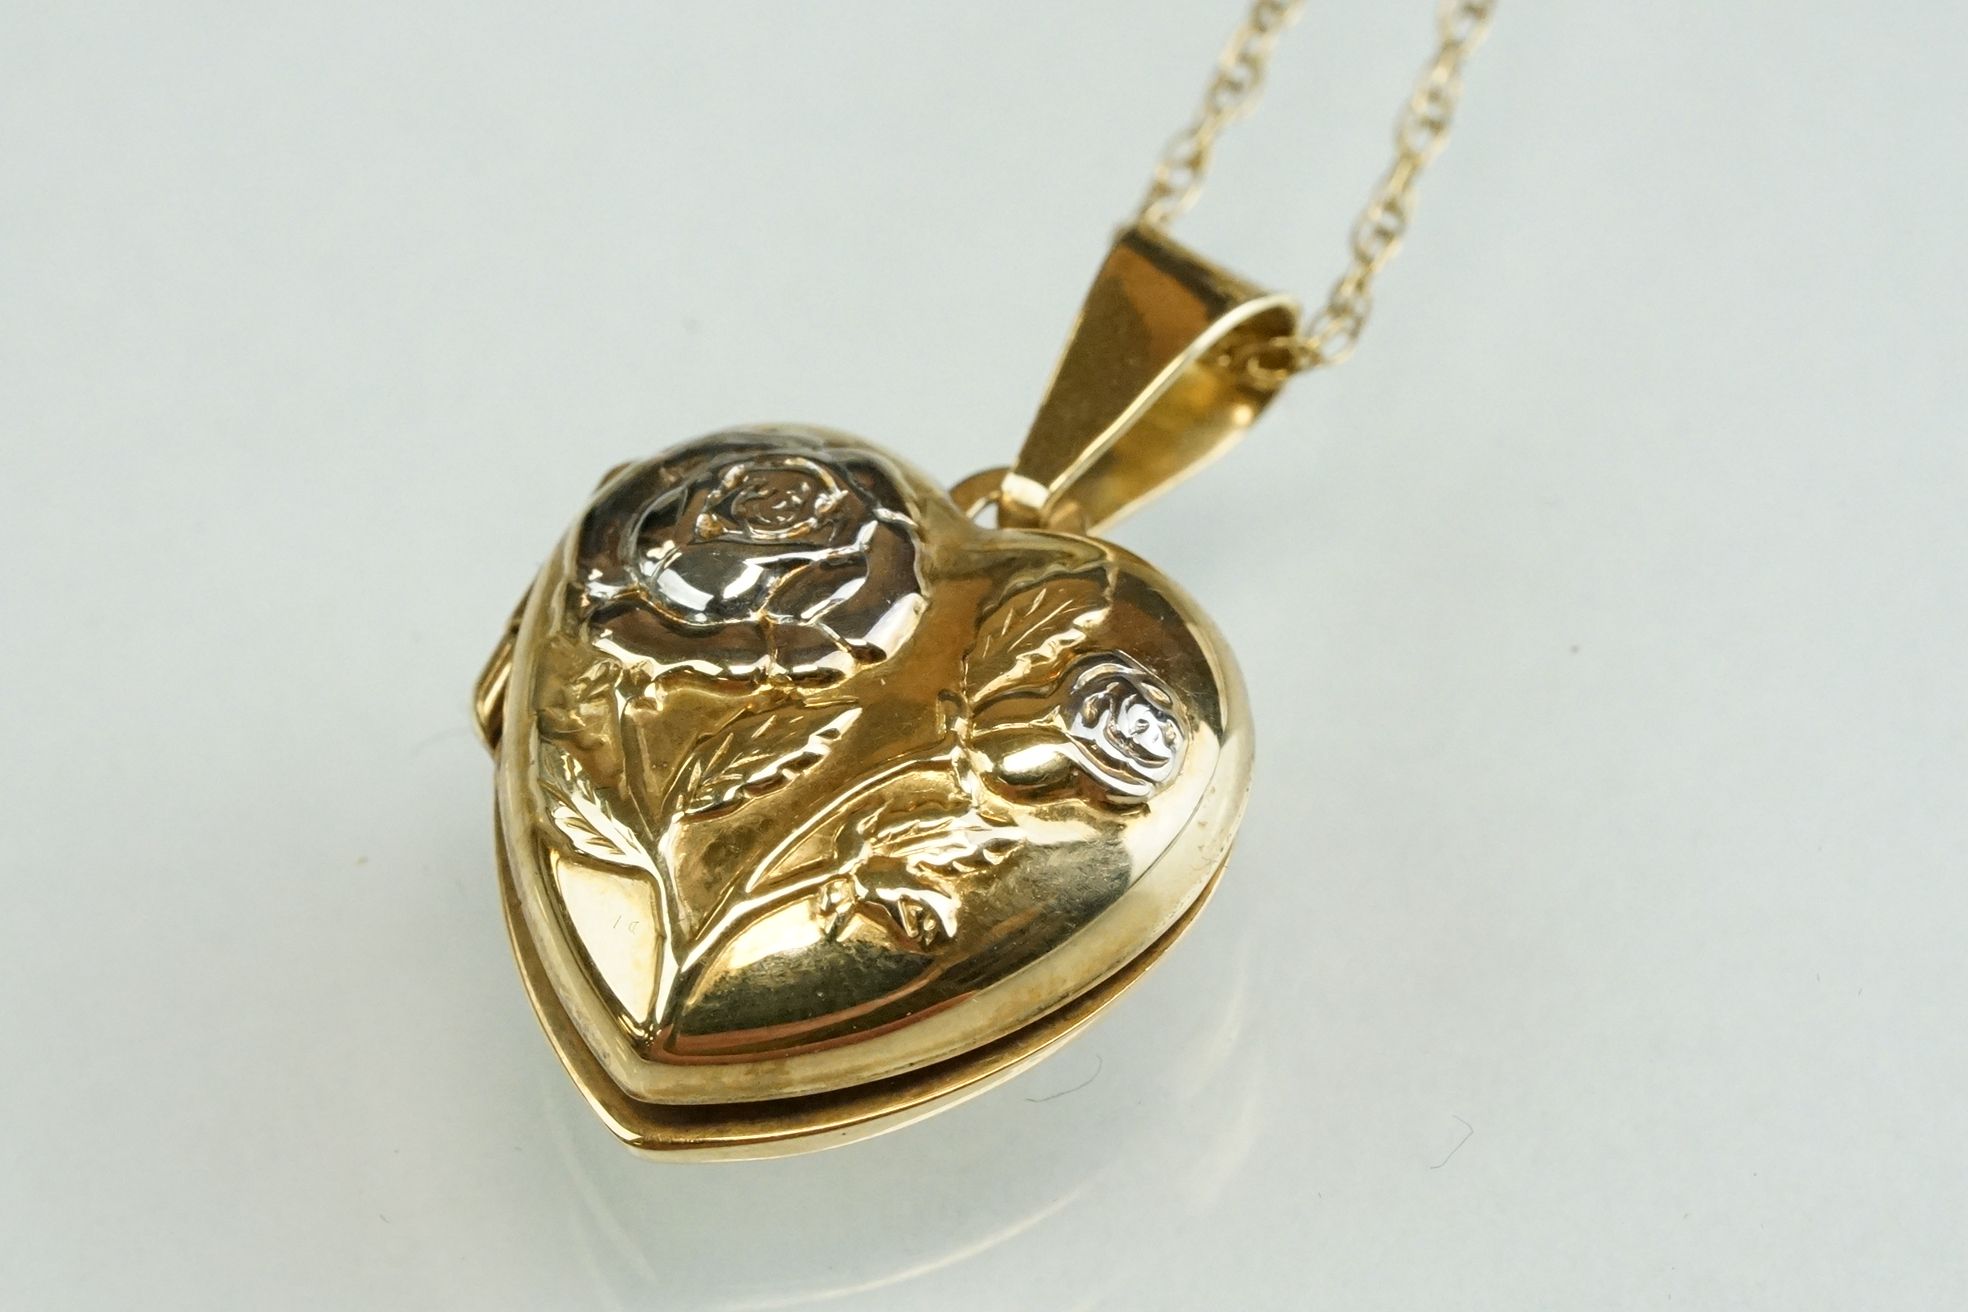 9ct yellow and white gold set gold heart shaped locket pendant, the lock with rose decoration in - Image 10 of 14